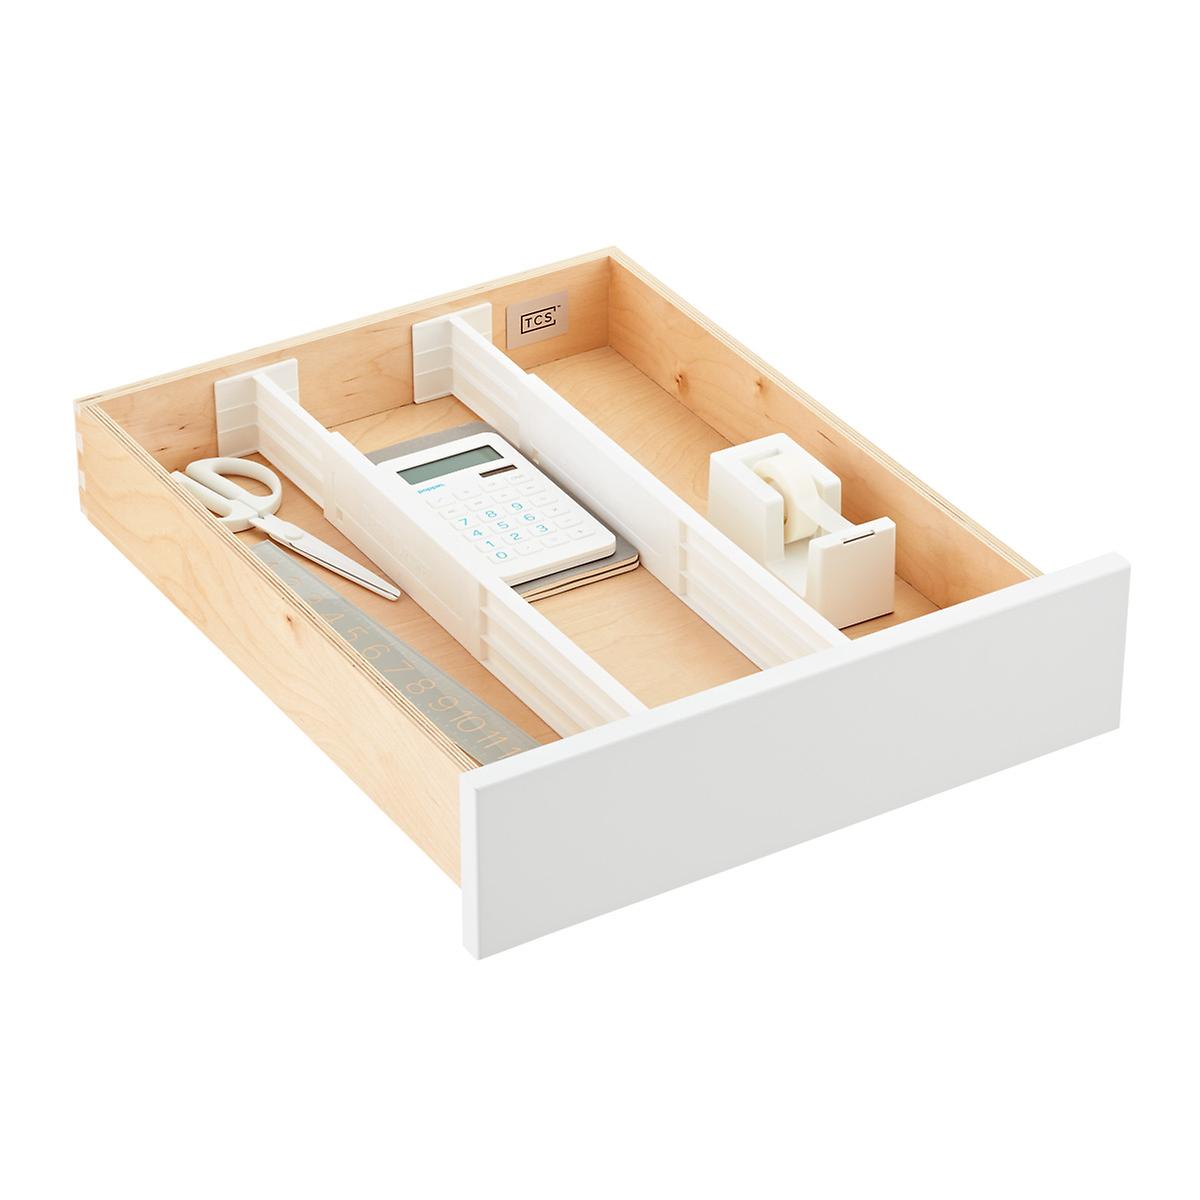 3 Dream Drawer Organizers The Container Store